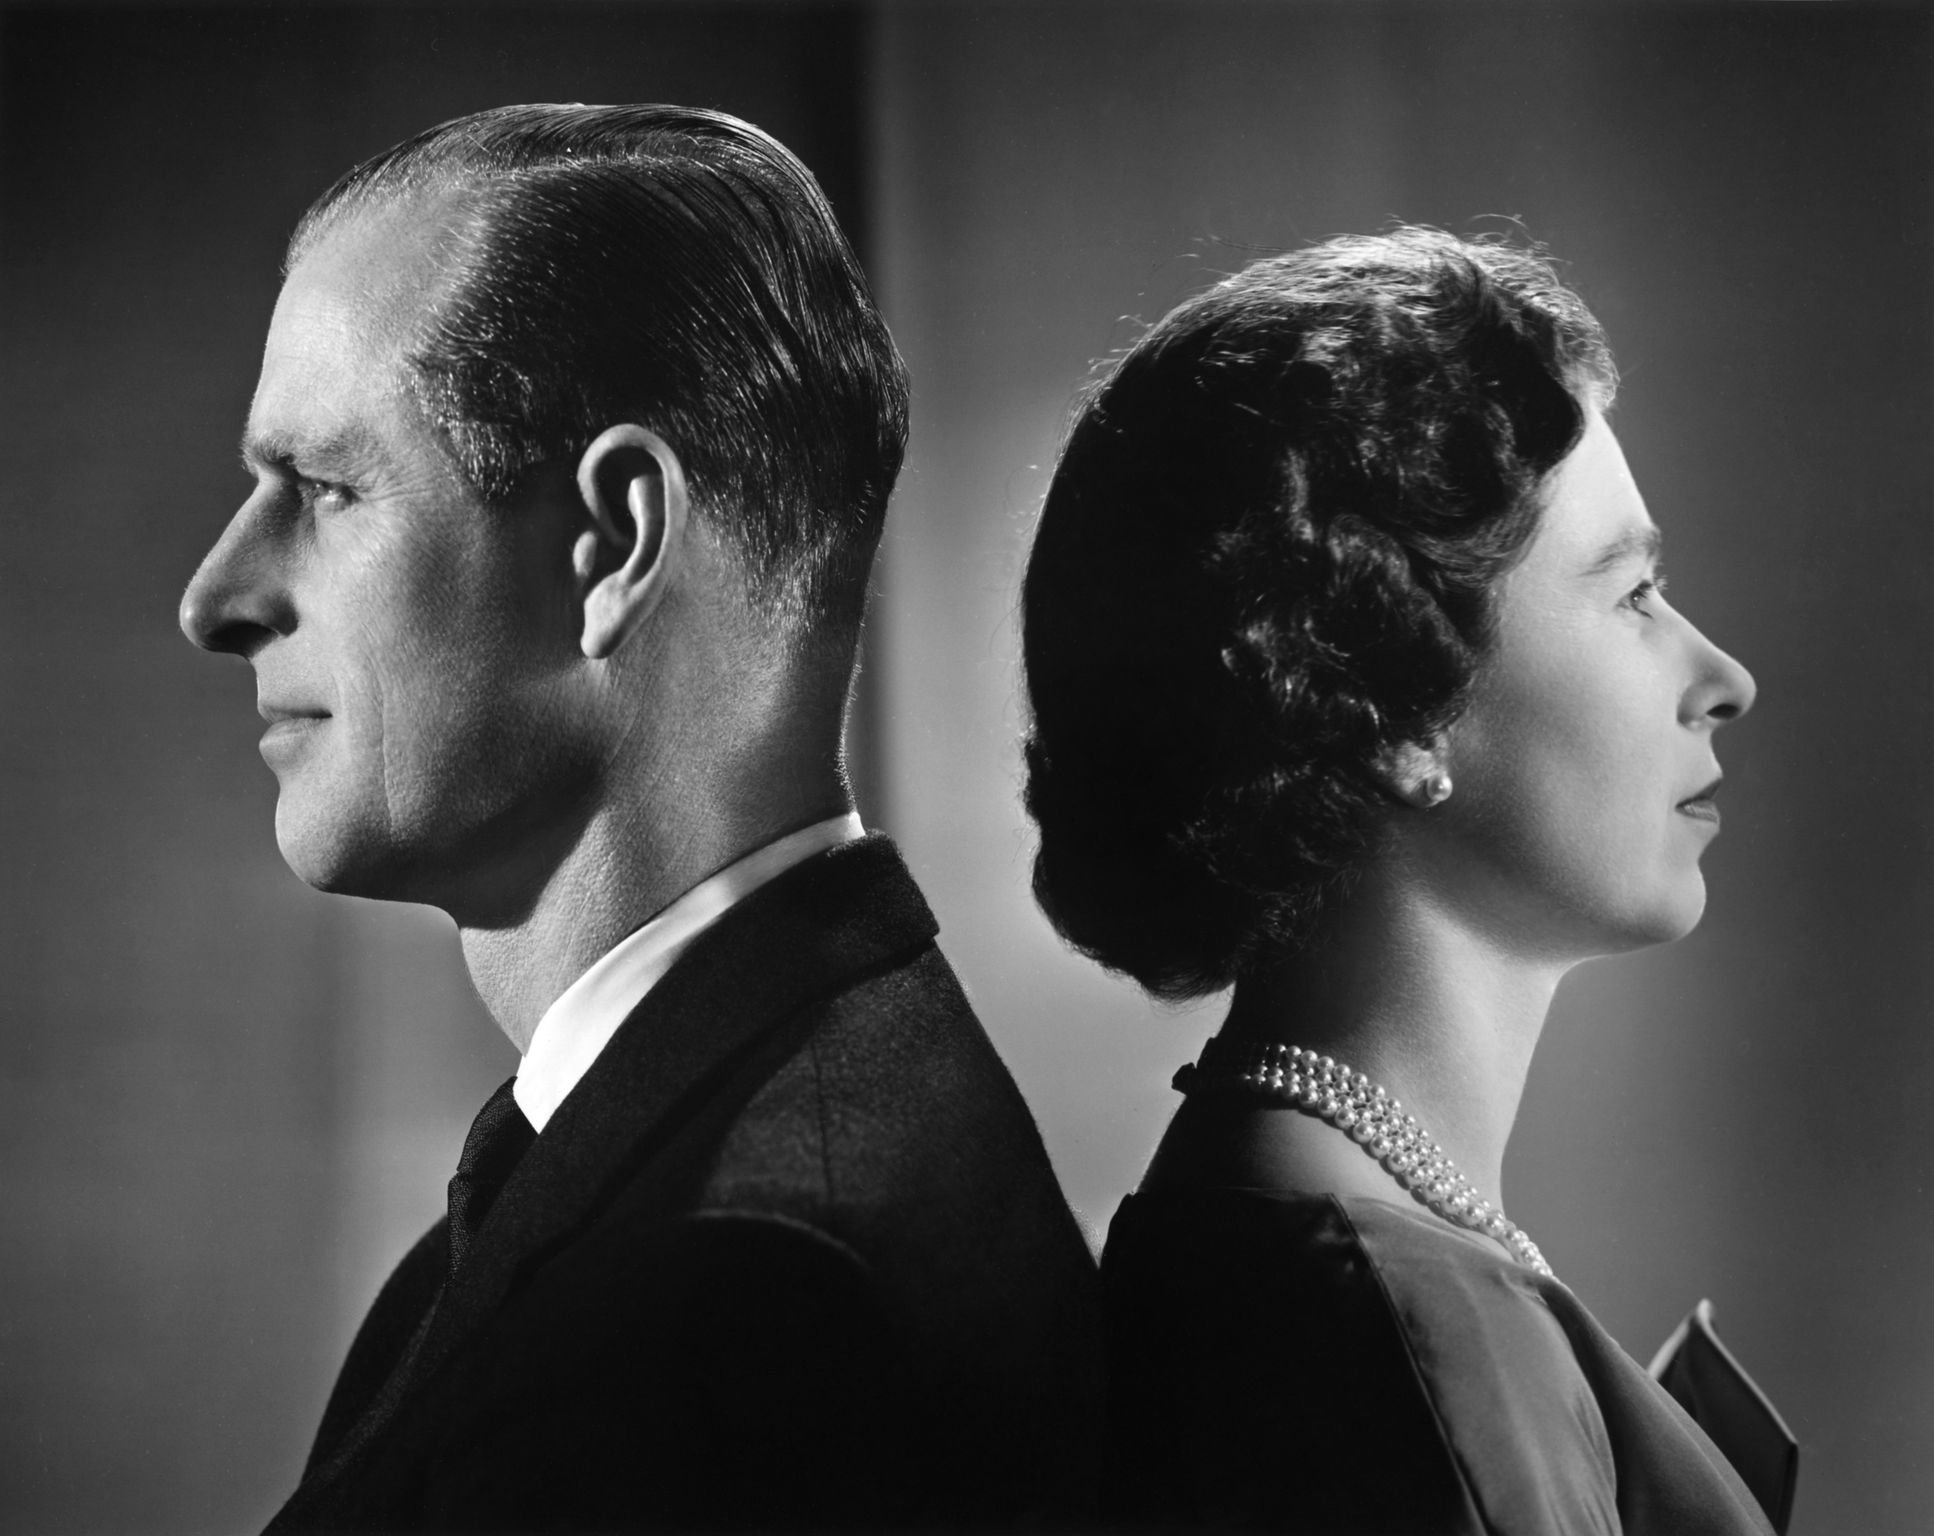 Queen Elizabeth II and Prince Philip pose for a portrait at home in Buckingham Palace in 1958 in London, England | Source: Getty Images